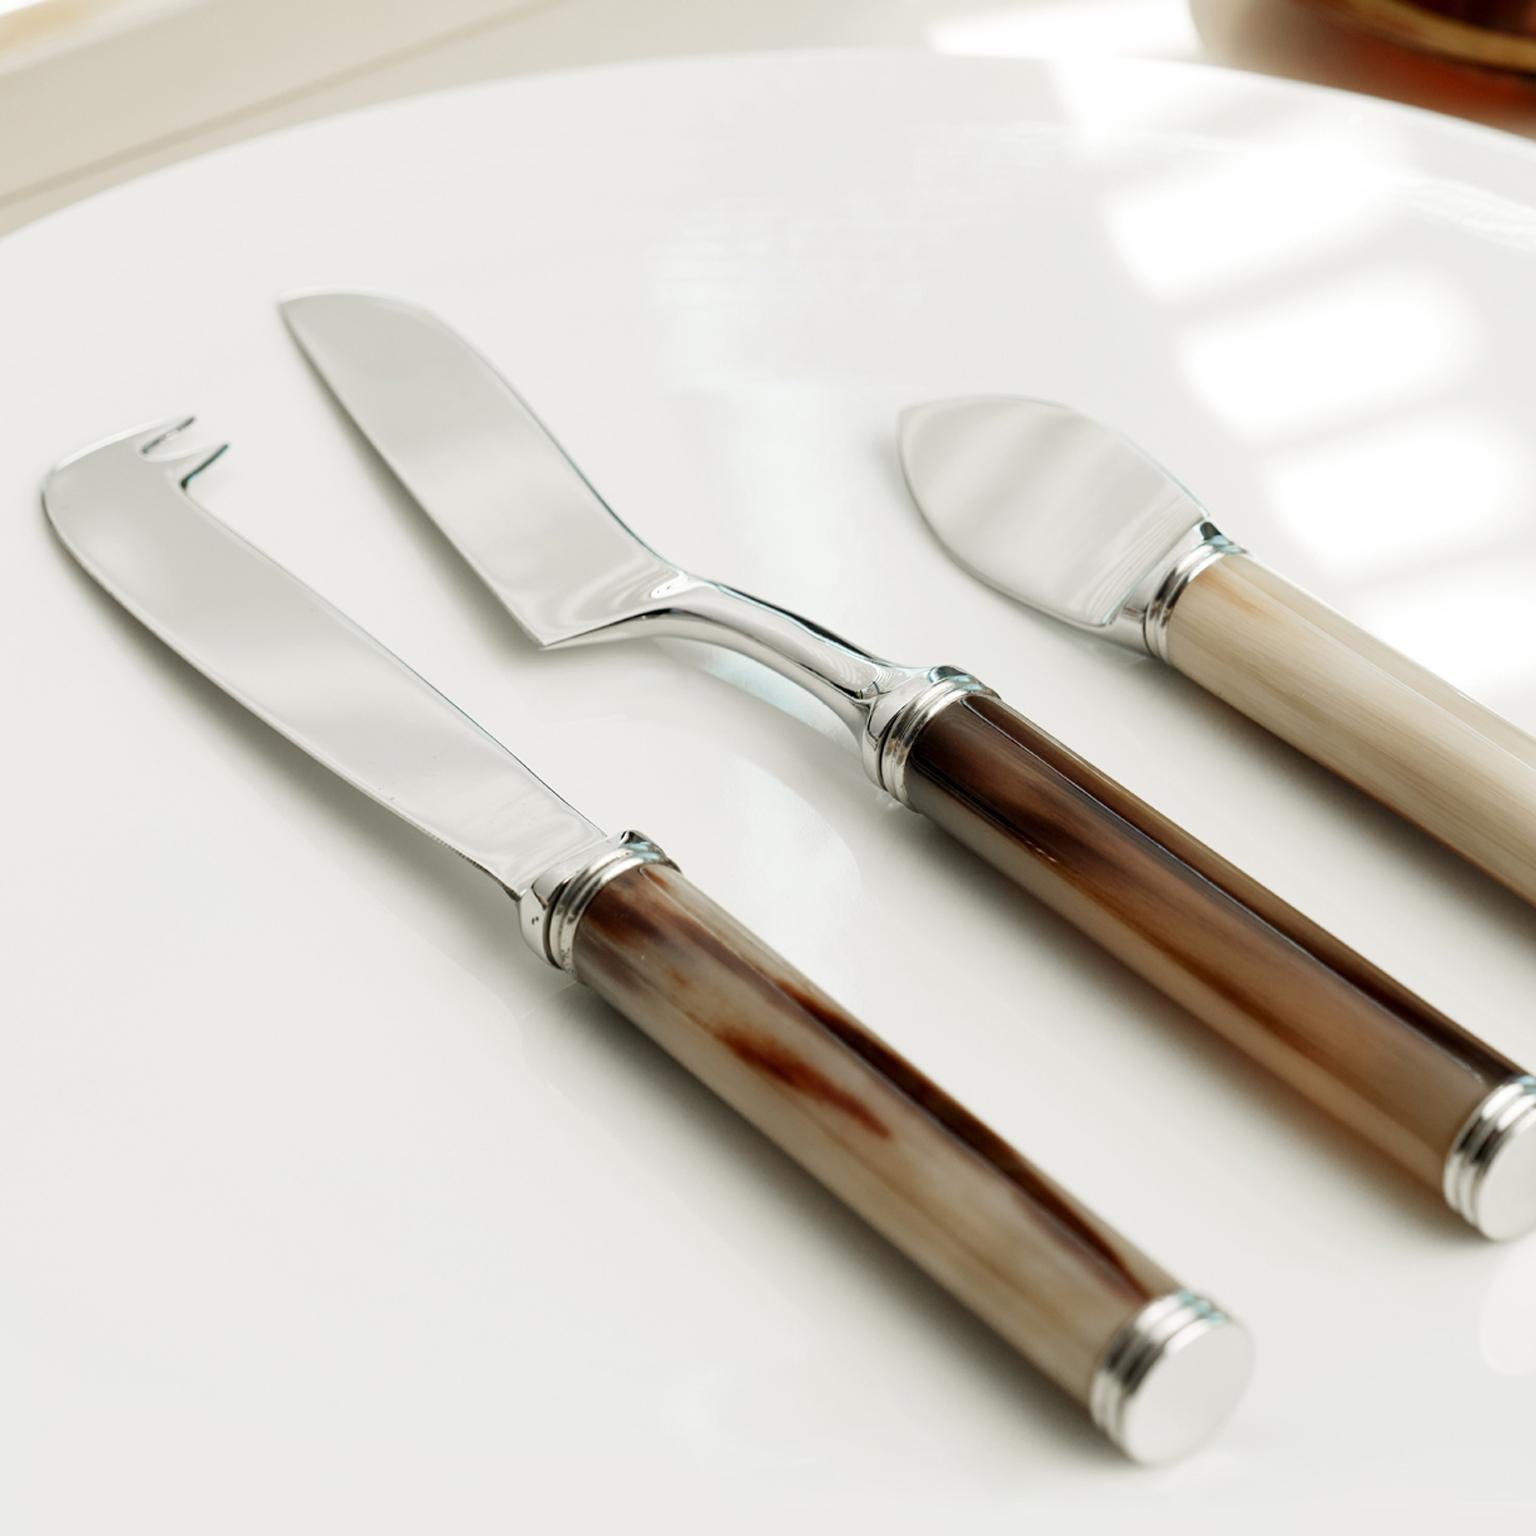 Designed with both form and function in mind, this set of knives is composed of three specific tools to cut hard, semi-hard and soft cheeses and to spread butter. Each knife features a durable blade in stainless steel and it is distinguished by an